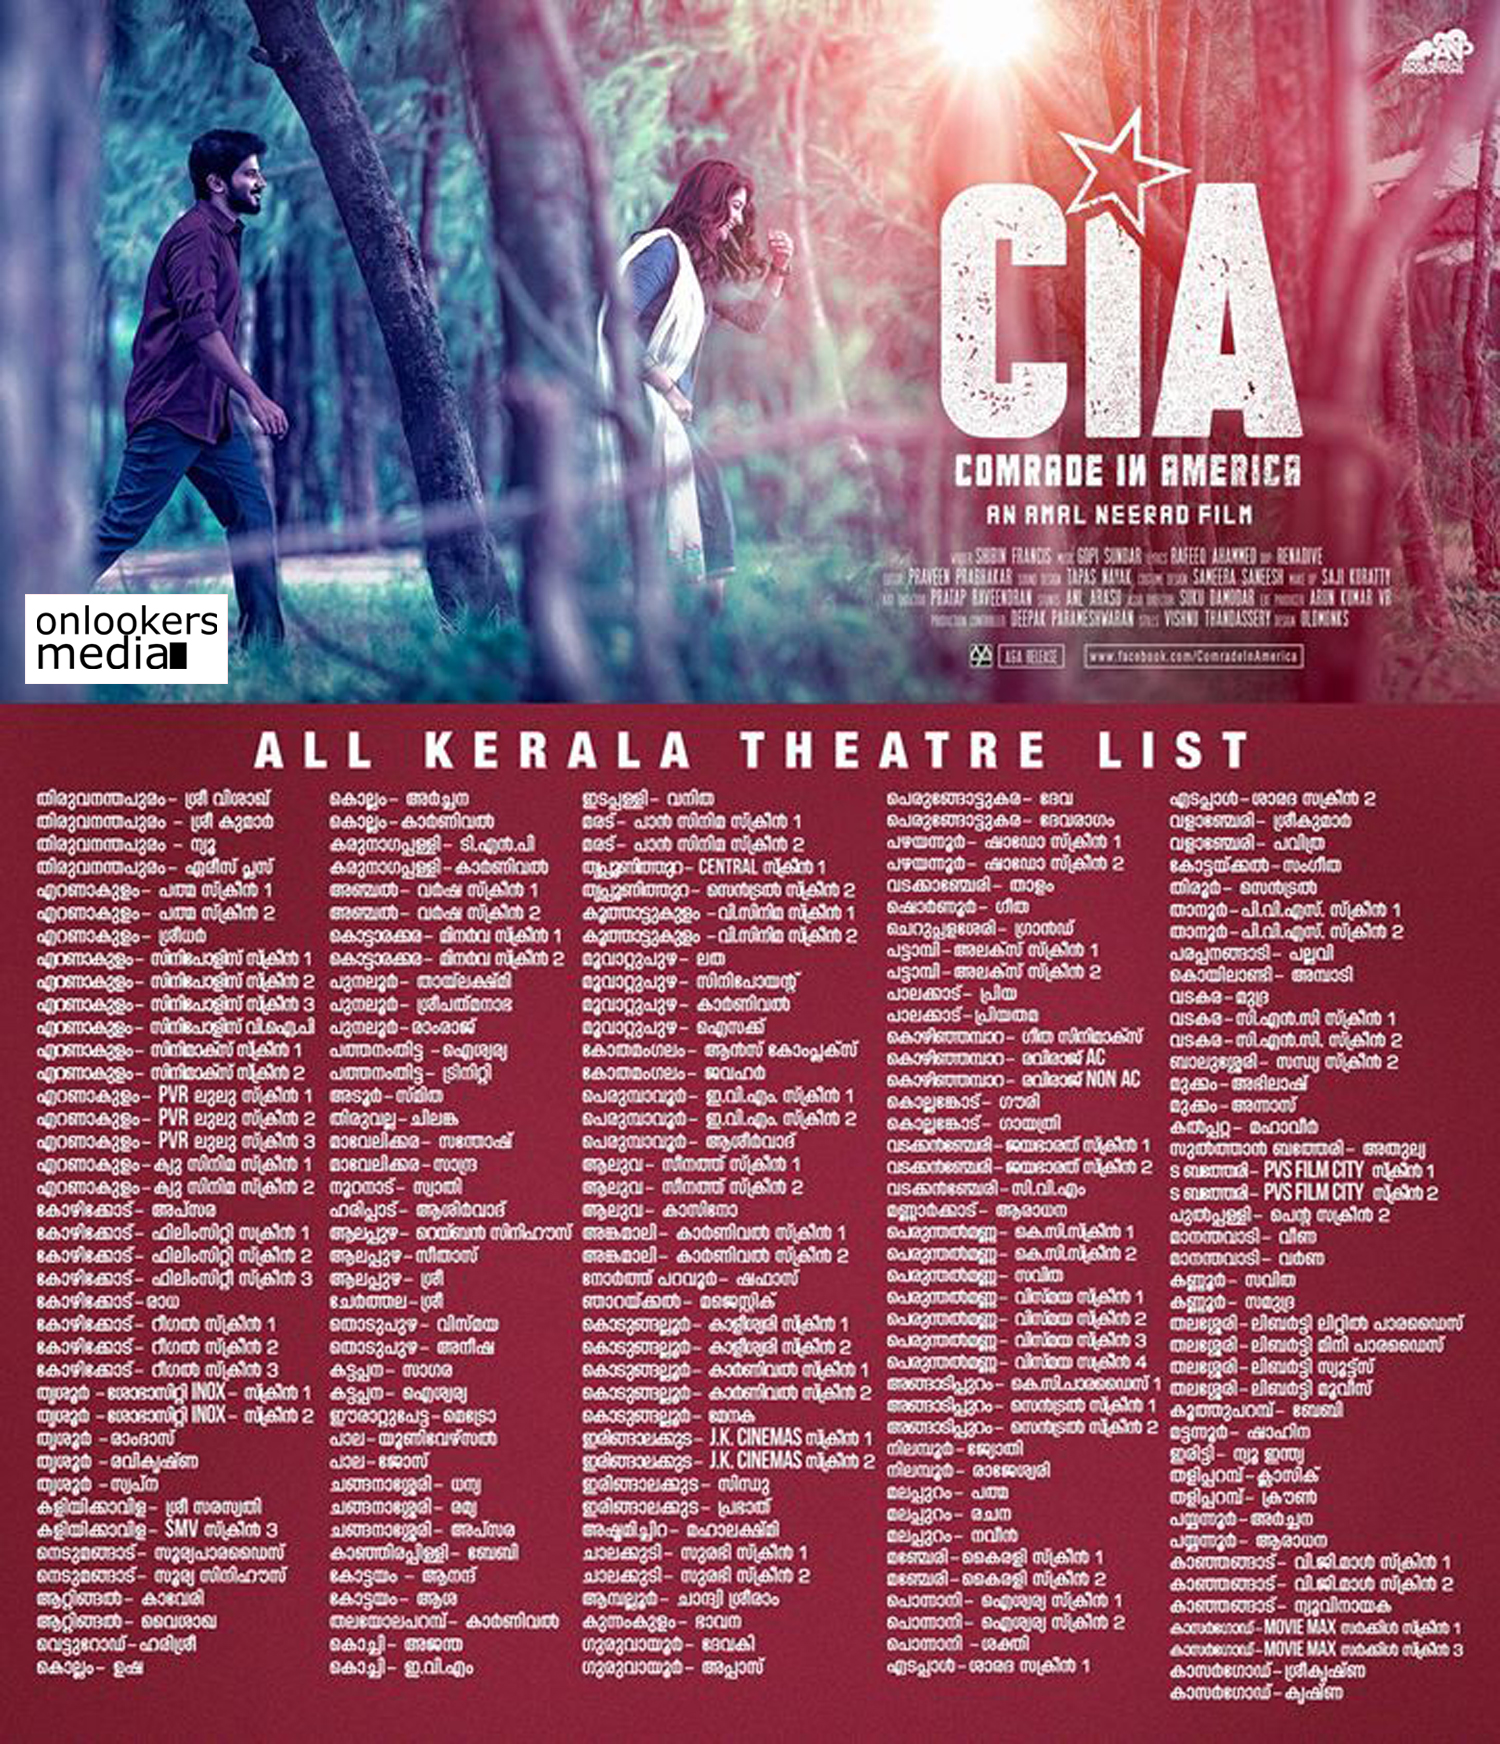 Comrade In America Cia Theatre List You can also download movie, subtitles to your pc to watch movies offline. onlookersmedia